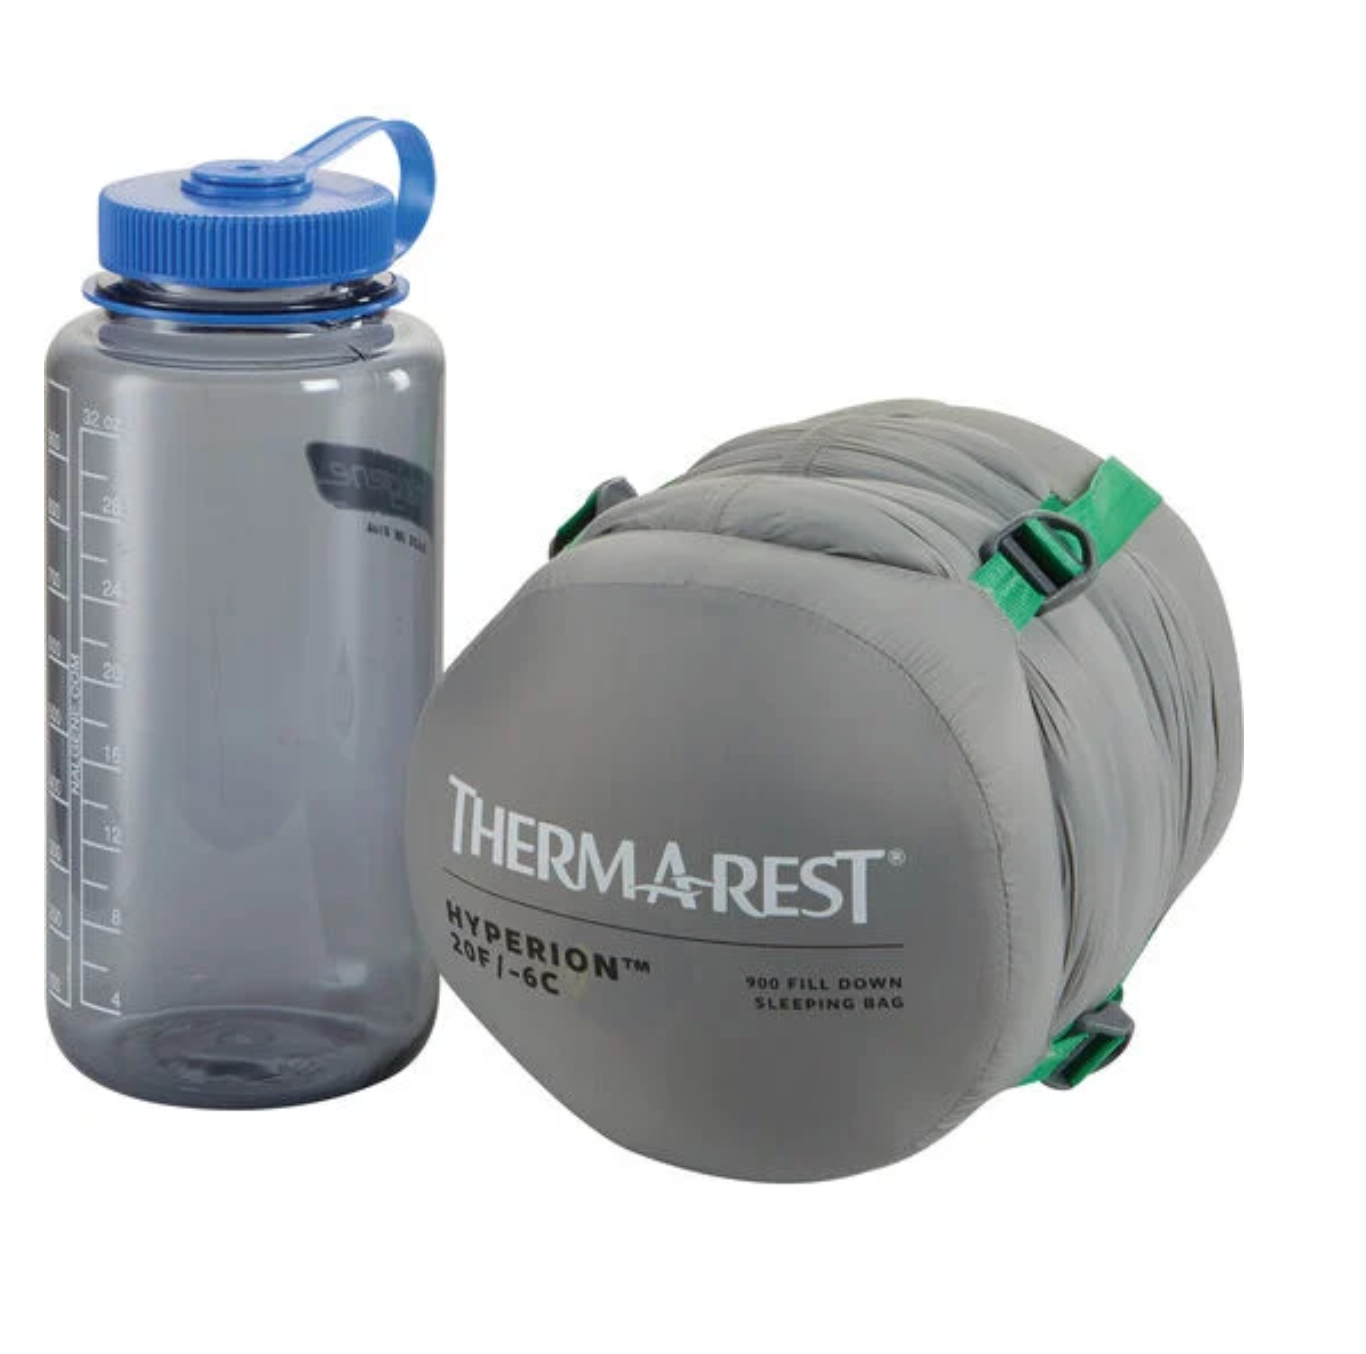 Thermarest Hyperion 20F/-6C Sleeping Bag